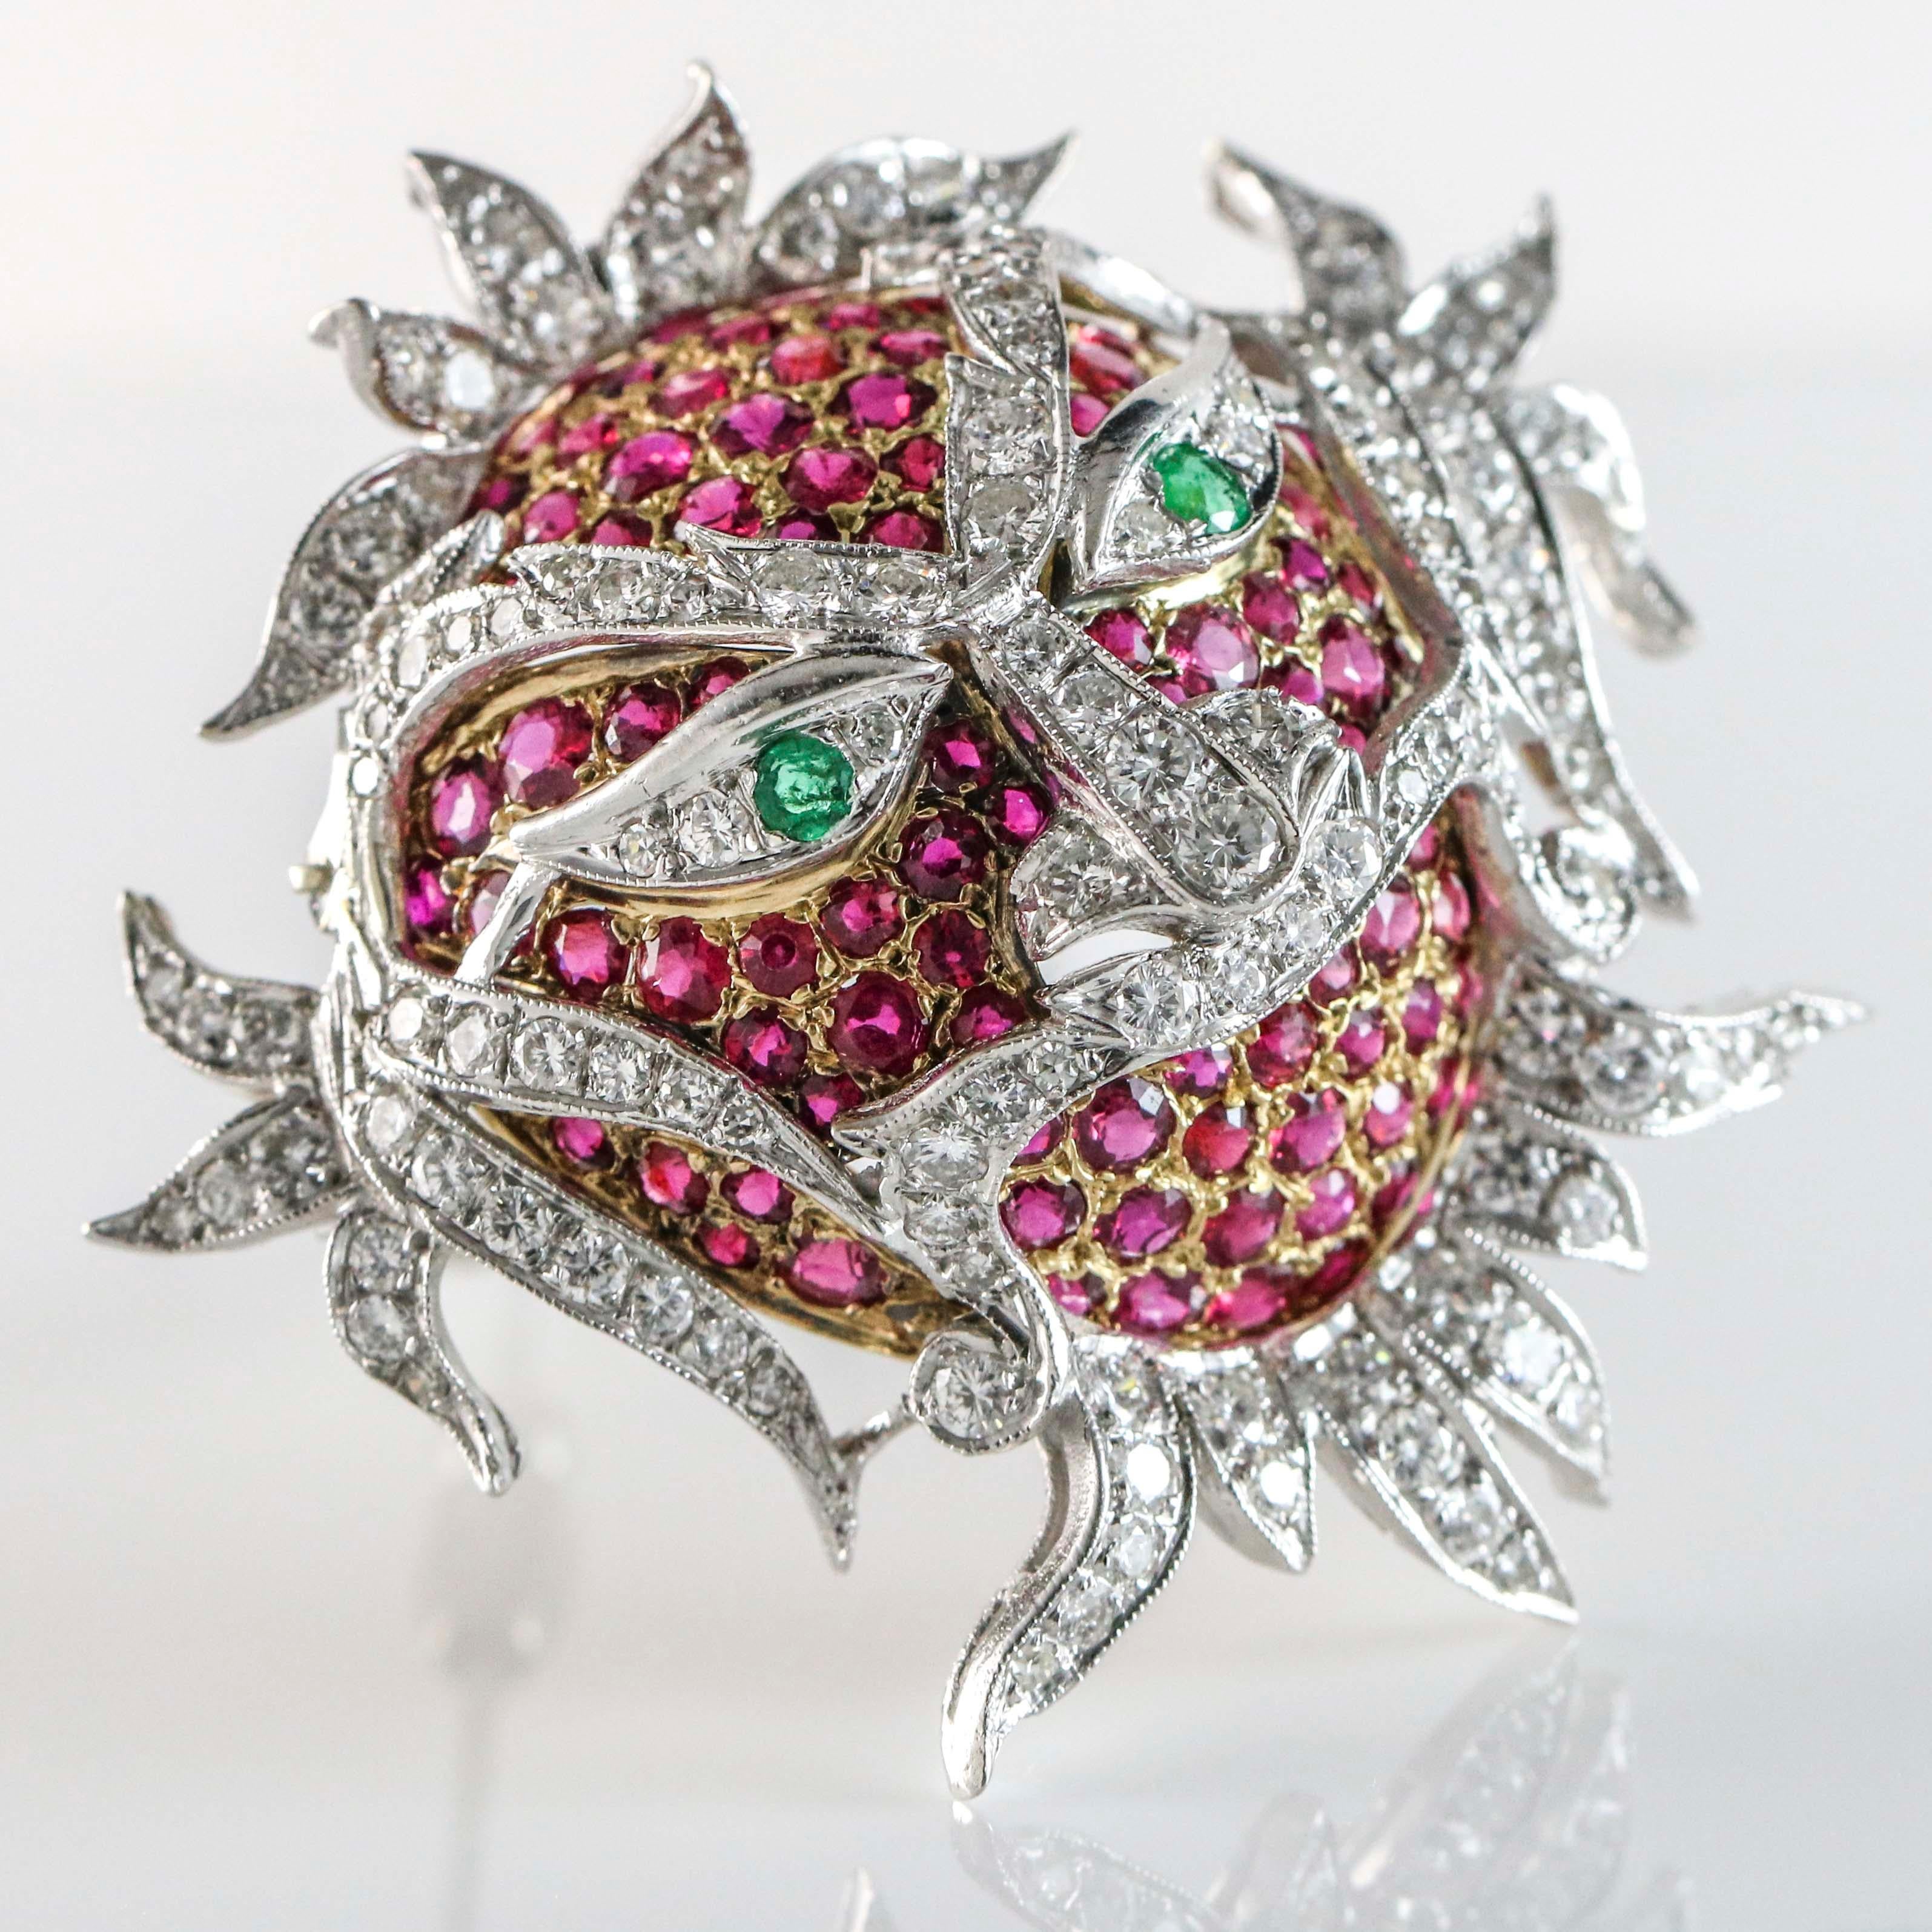 Carnival ornate mask pin crafted in 18k white and yellow gold with emerald eyes. The brooch is prong set with 95 natural round cut rubies, and 135 round brilliant cut diamonds. Ruby total carat weight, 5 carats. Diamond total carat weight, 3 carats.